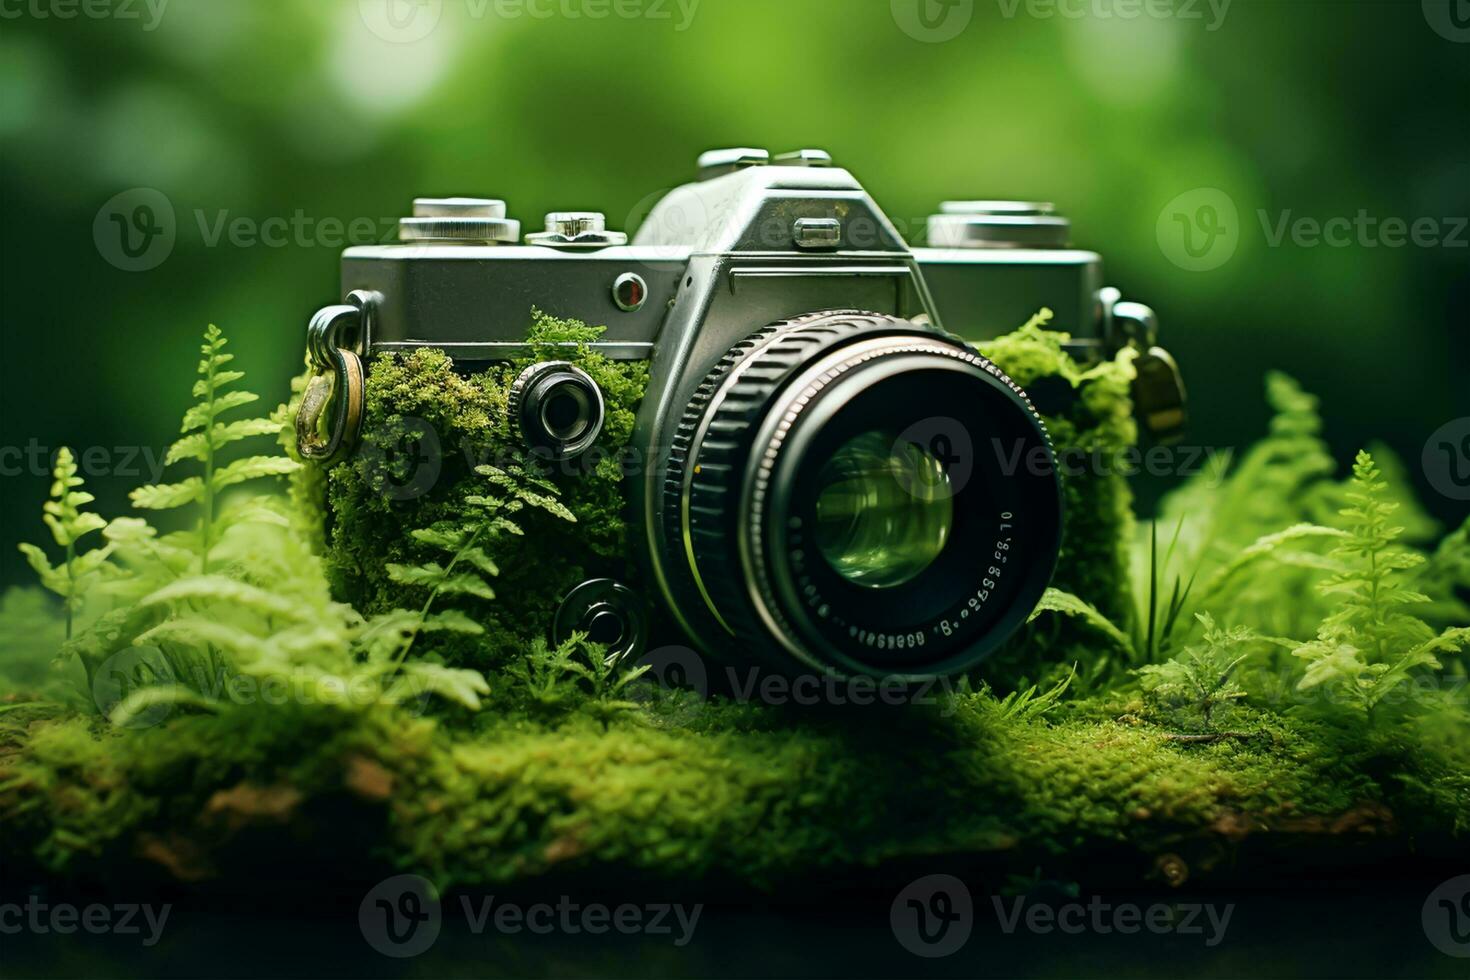 Green camera on grass with nature bokeh background. Nature concept. photo